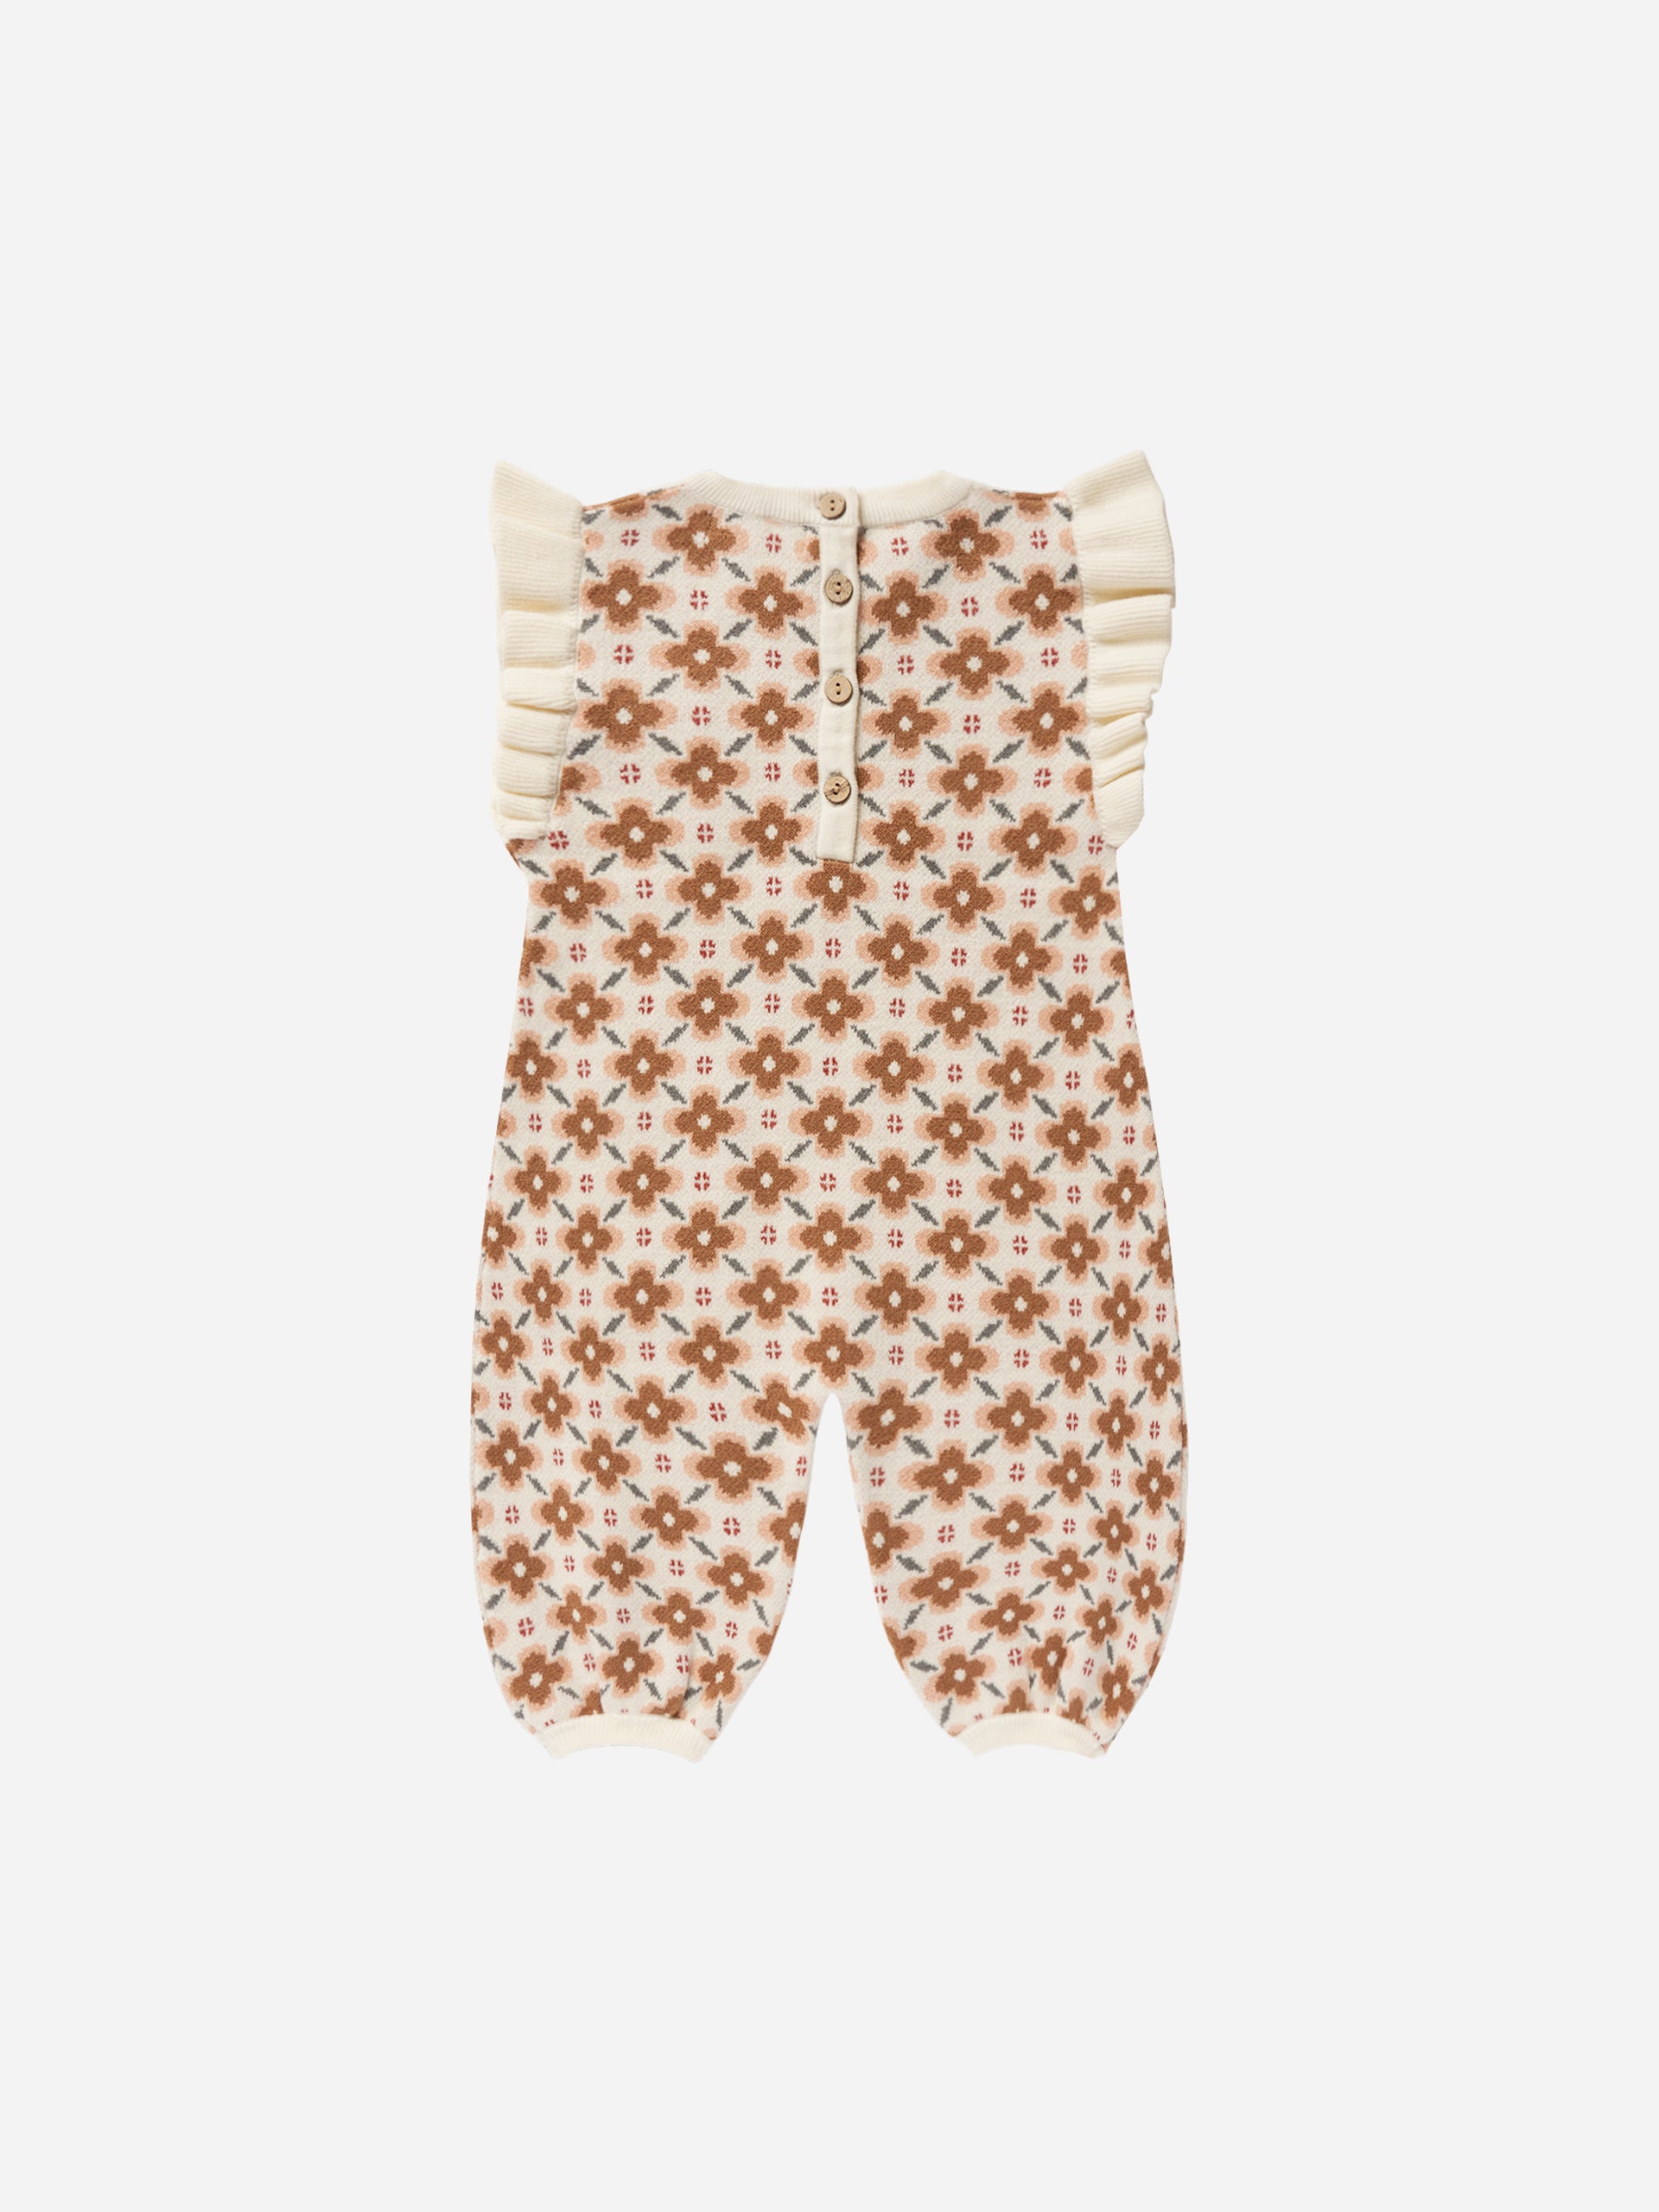 Stella Knit Jumpsuit || Mosaic - Rylee + Cru | Kids Clothes | Trendy Baby Clothes | Modern Infant Outfits |